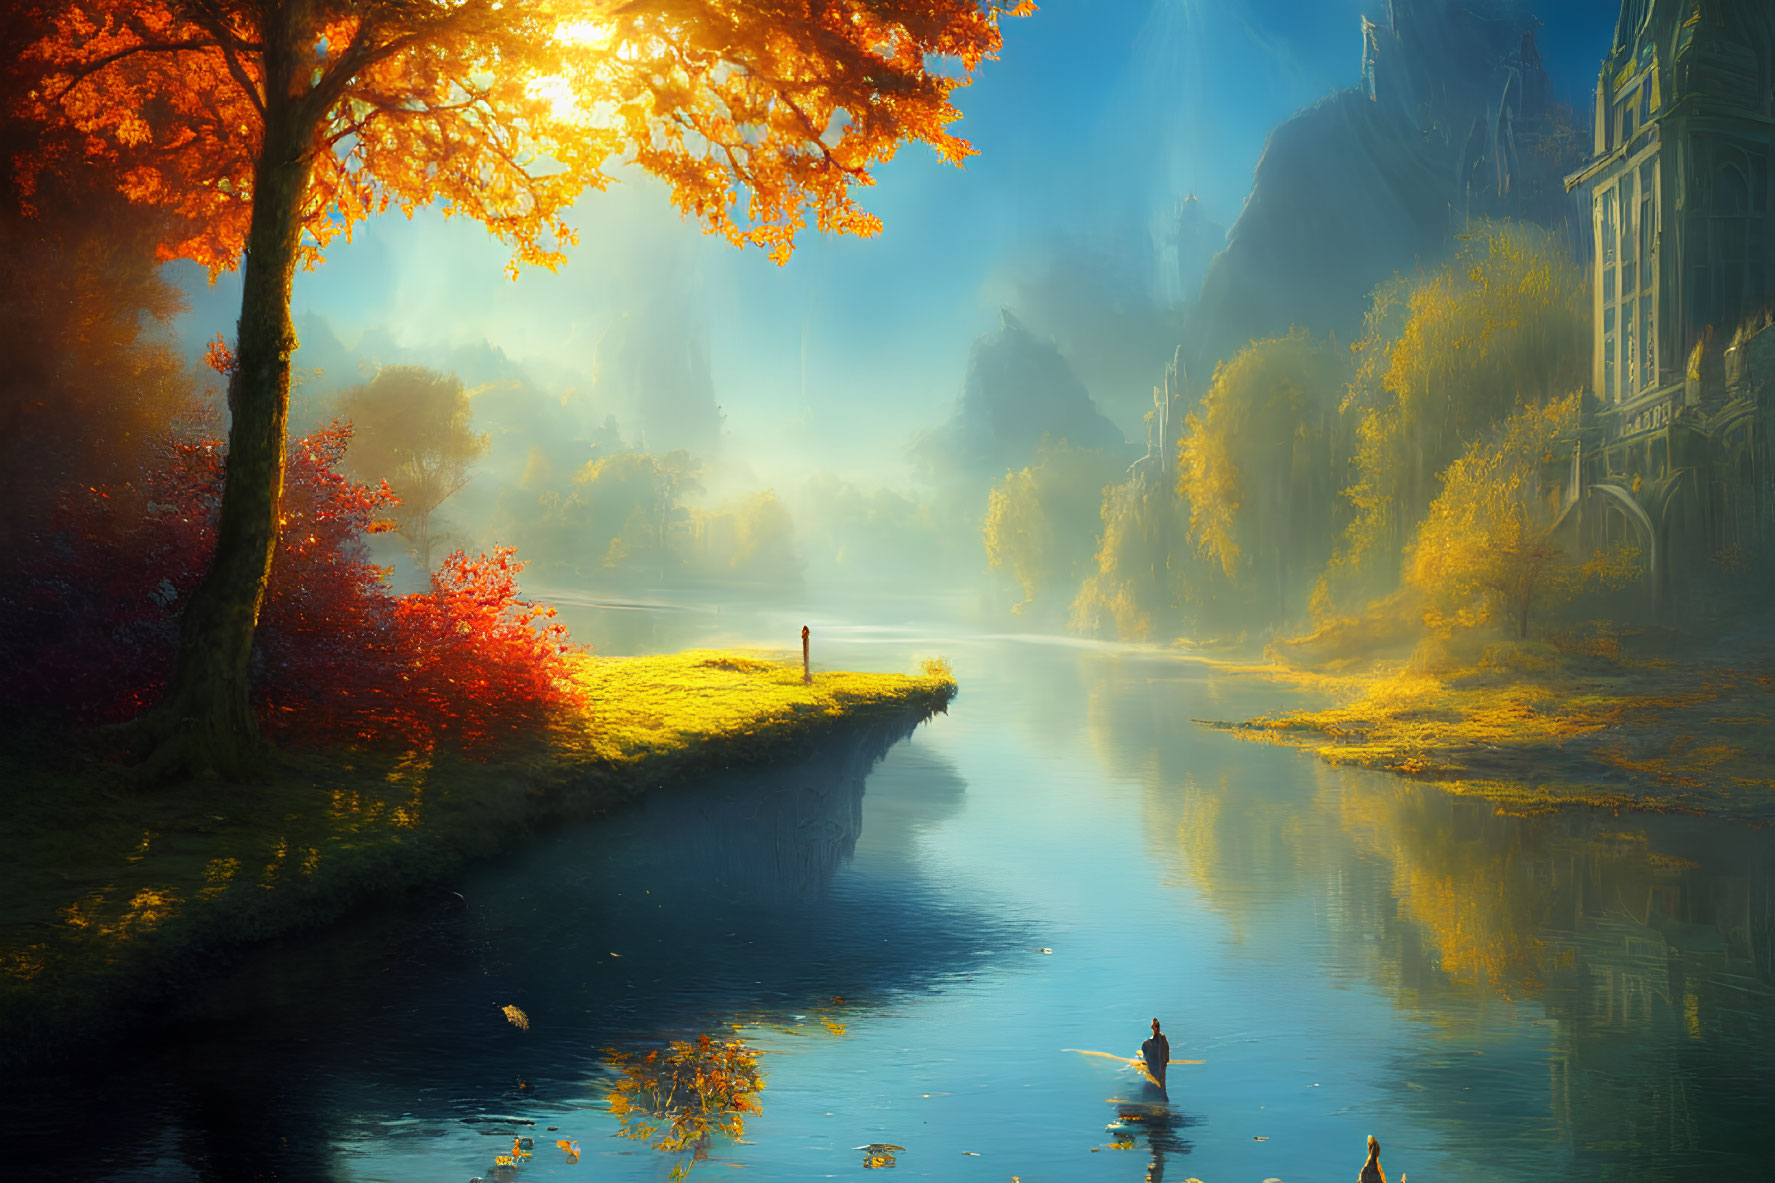 Tranquil autumn landscape with vibrant trees, river, canoe, and castle.